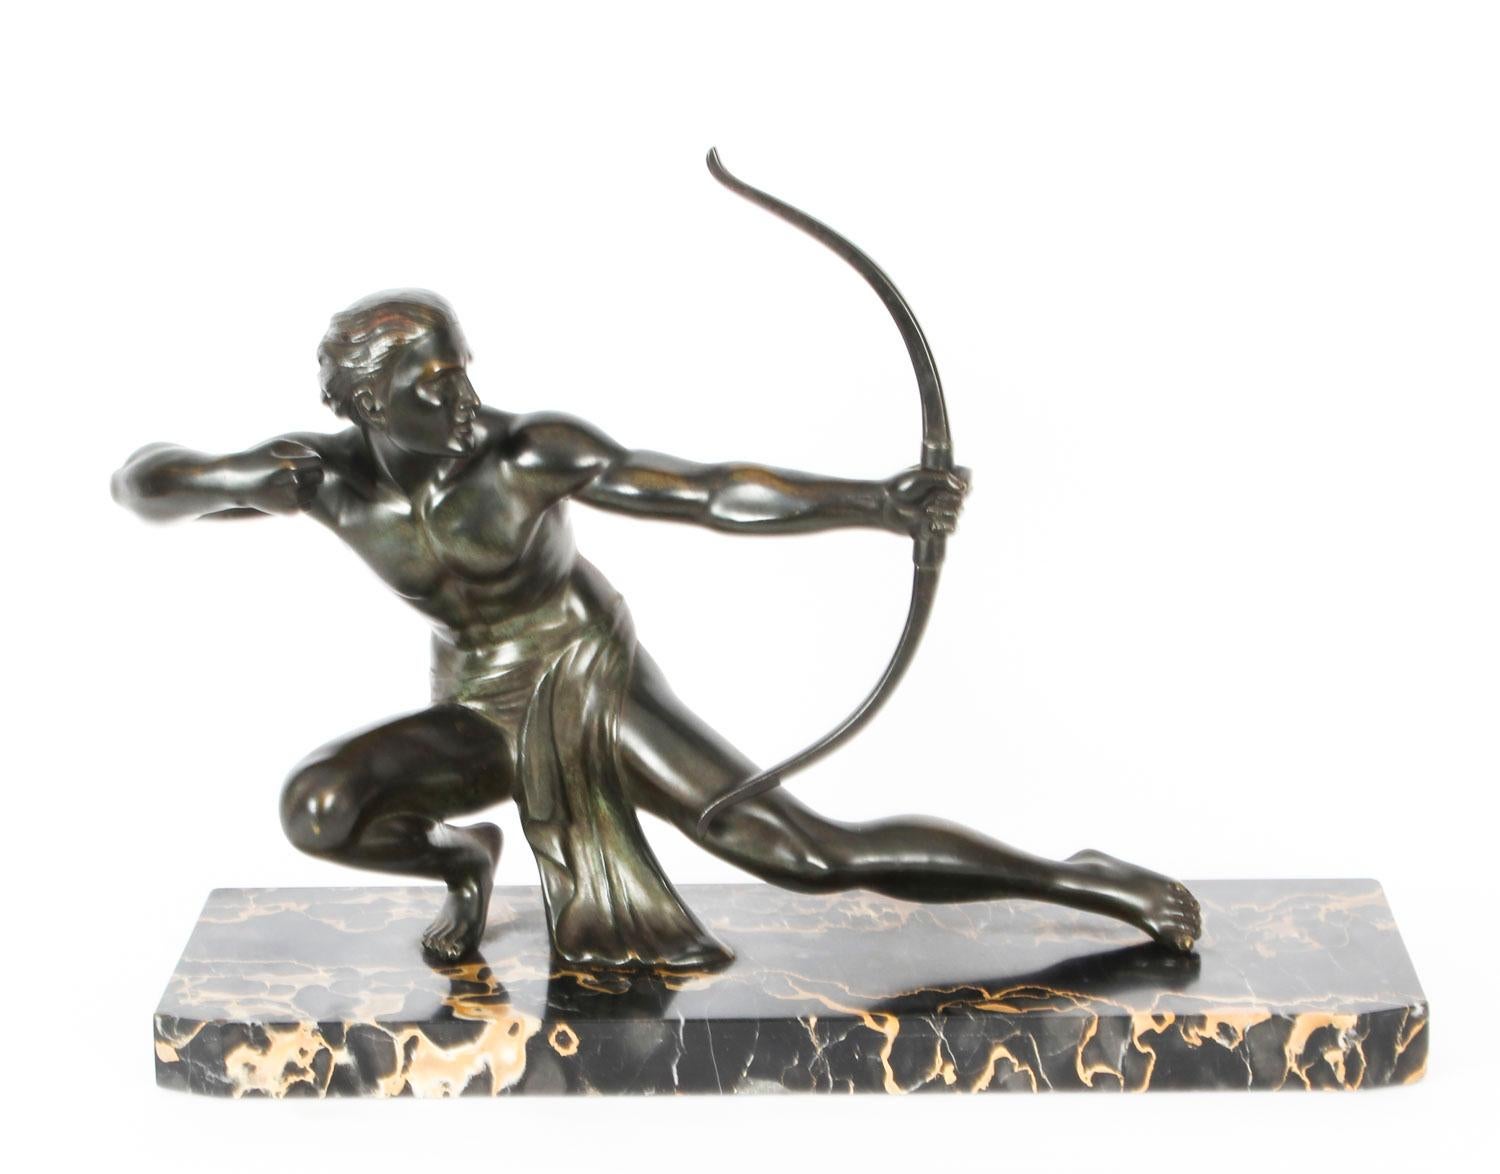 This is a magnificent large antique Italian Art Deco bronze sculpture of a semi-nude Archer, by the famous Italian sculptor, Salvatore Melani (1902-1934) and bearing his signature, circa 1920 in date.
 
This stunning sculpture features the